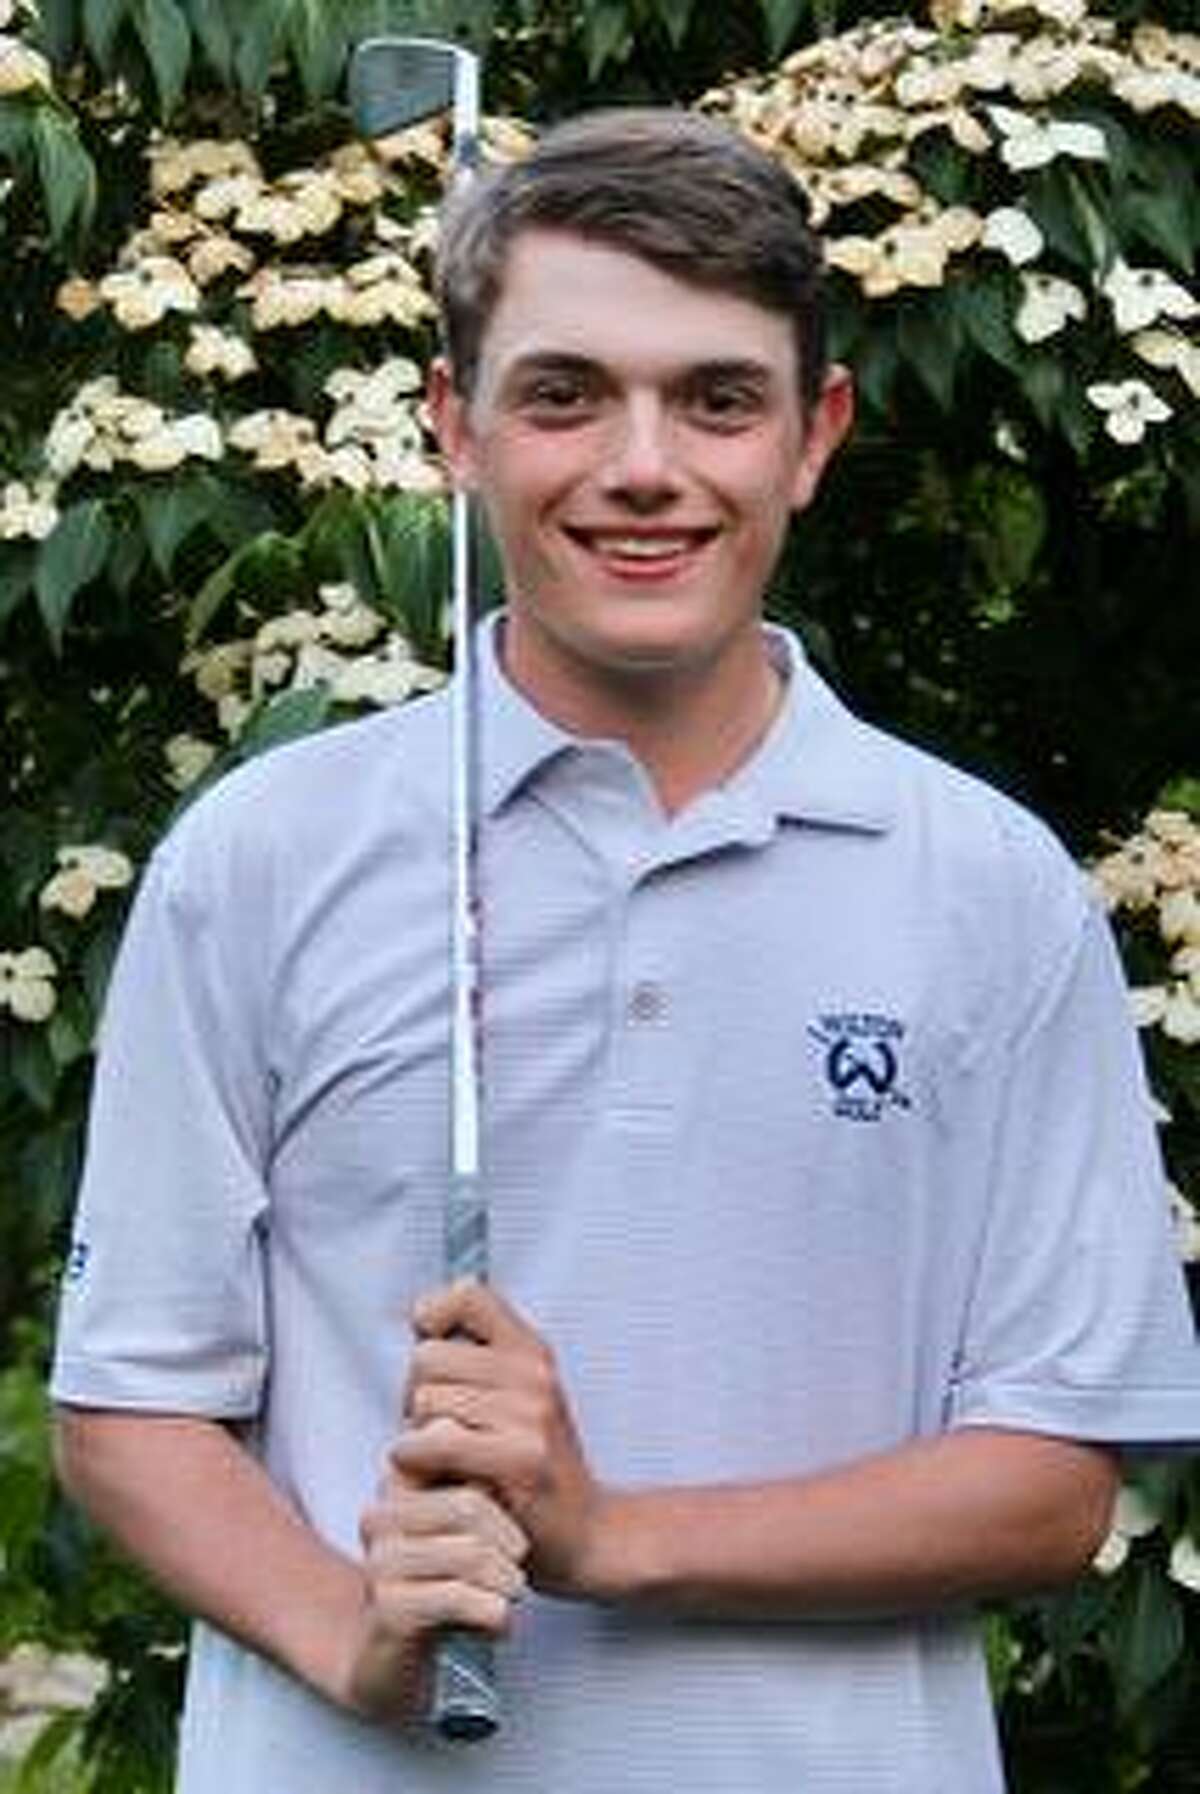 Alex Elia of Wilton will be representing the state on the New England Junior golf team.